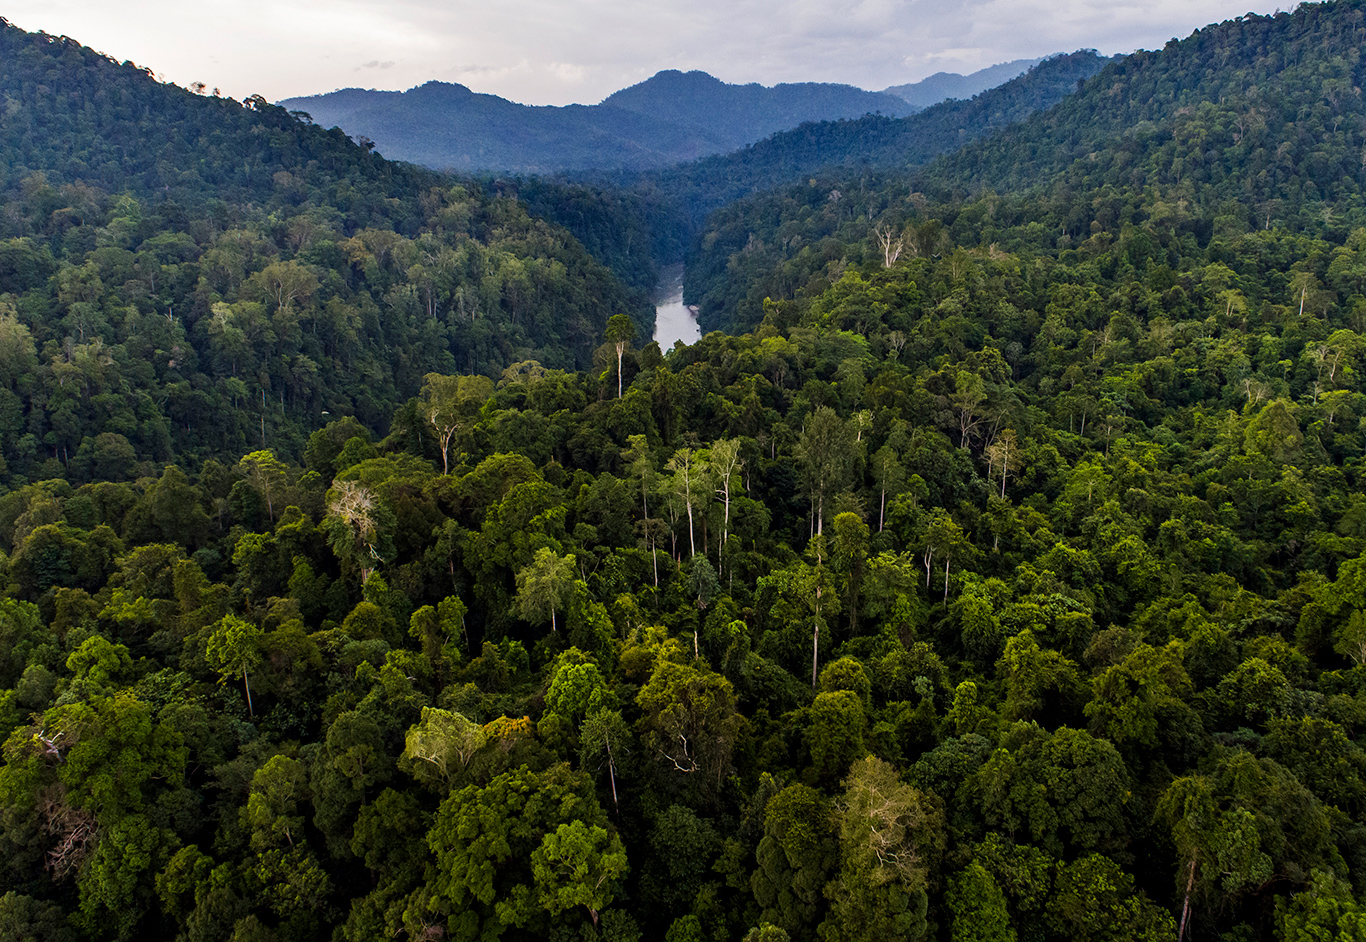 Forests of the Singkil-Bengkung region of the Leuser Ecosystem (Photo: Paul Hilton)